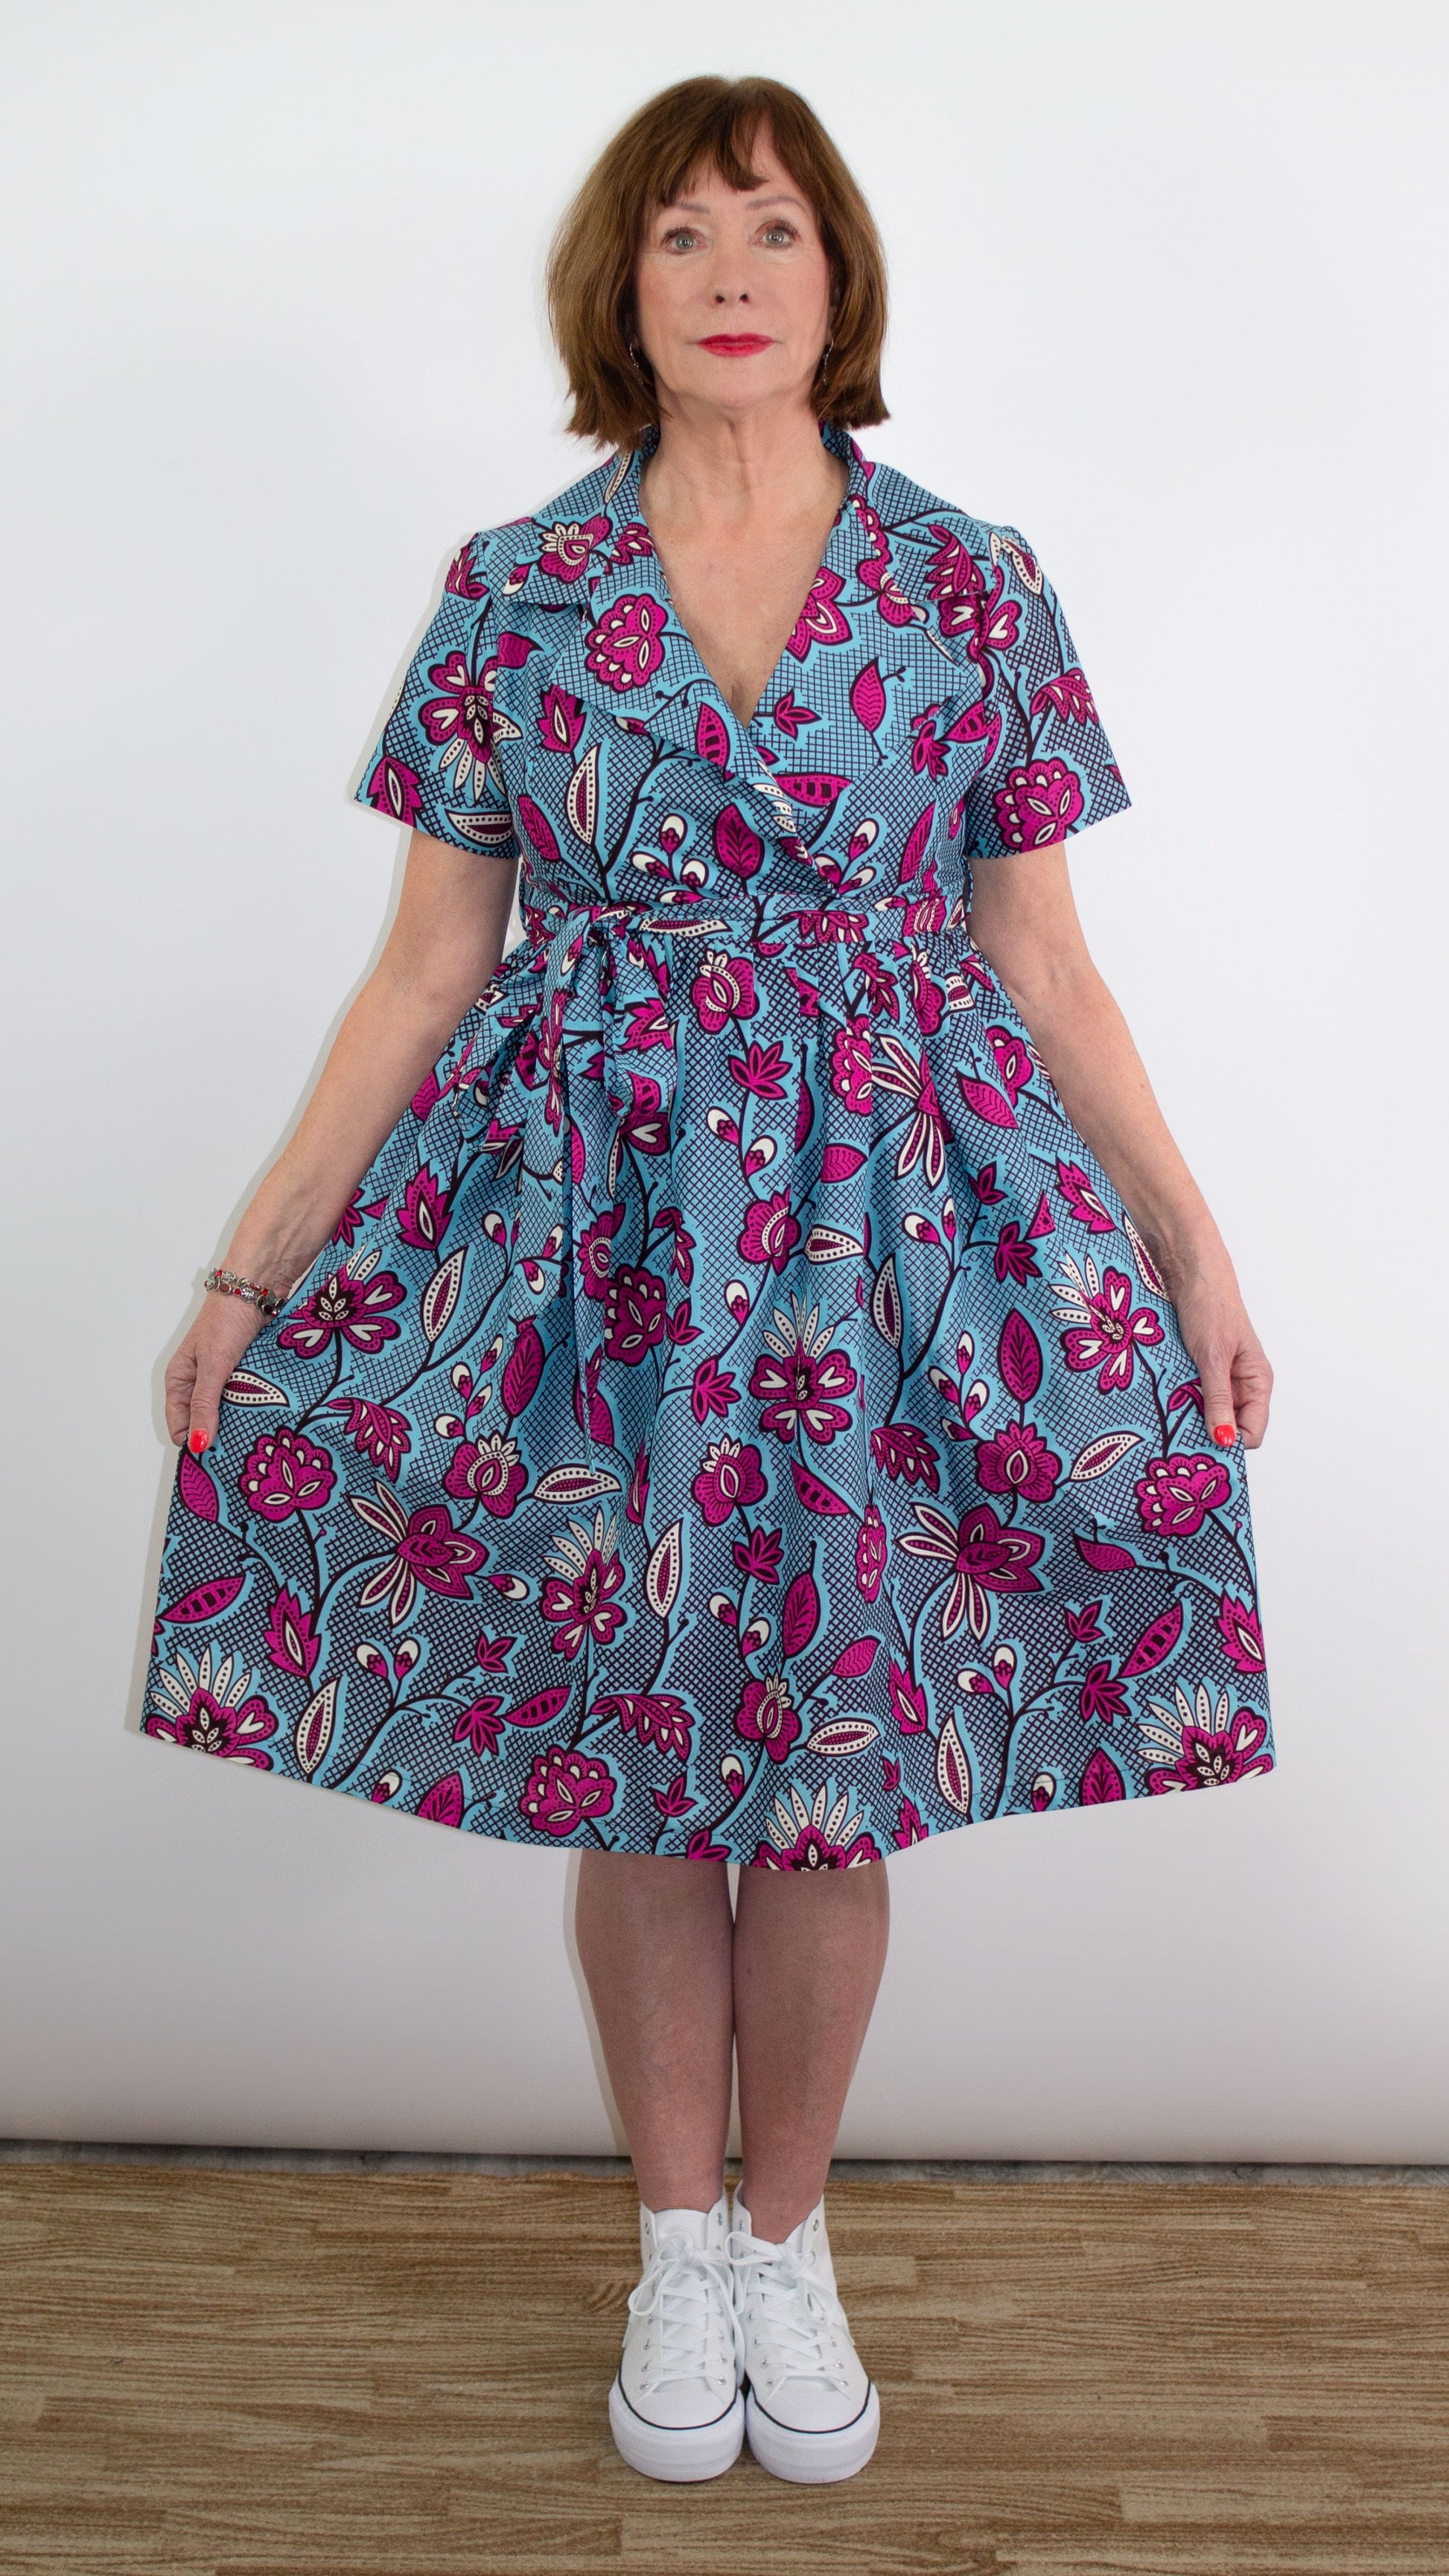 A model striking a pose in a blue dress with pink floral print, gracefully holding and lifting the dress. The lively floral patterns and wrap design, accentuated by this dynamic pose, create a stylish and flattering silhouette, capturing the essence of this eye-catching ensemble.